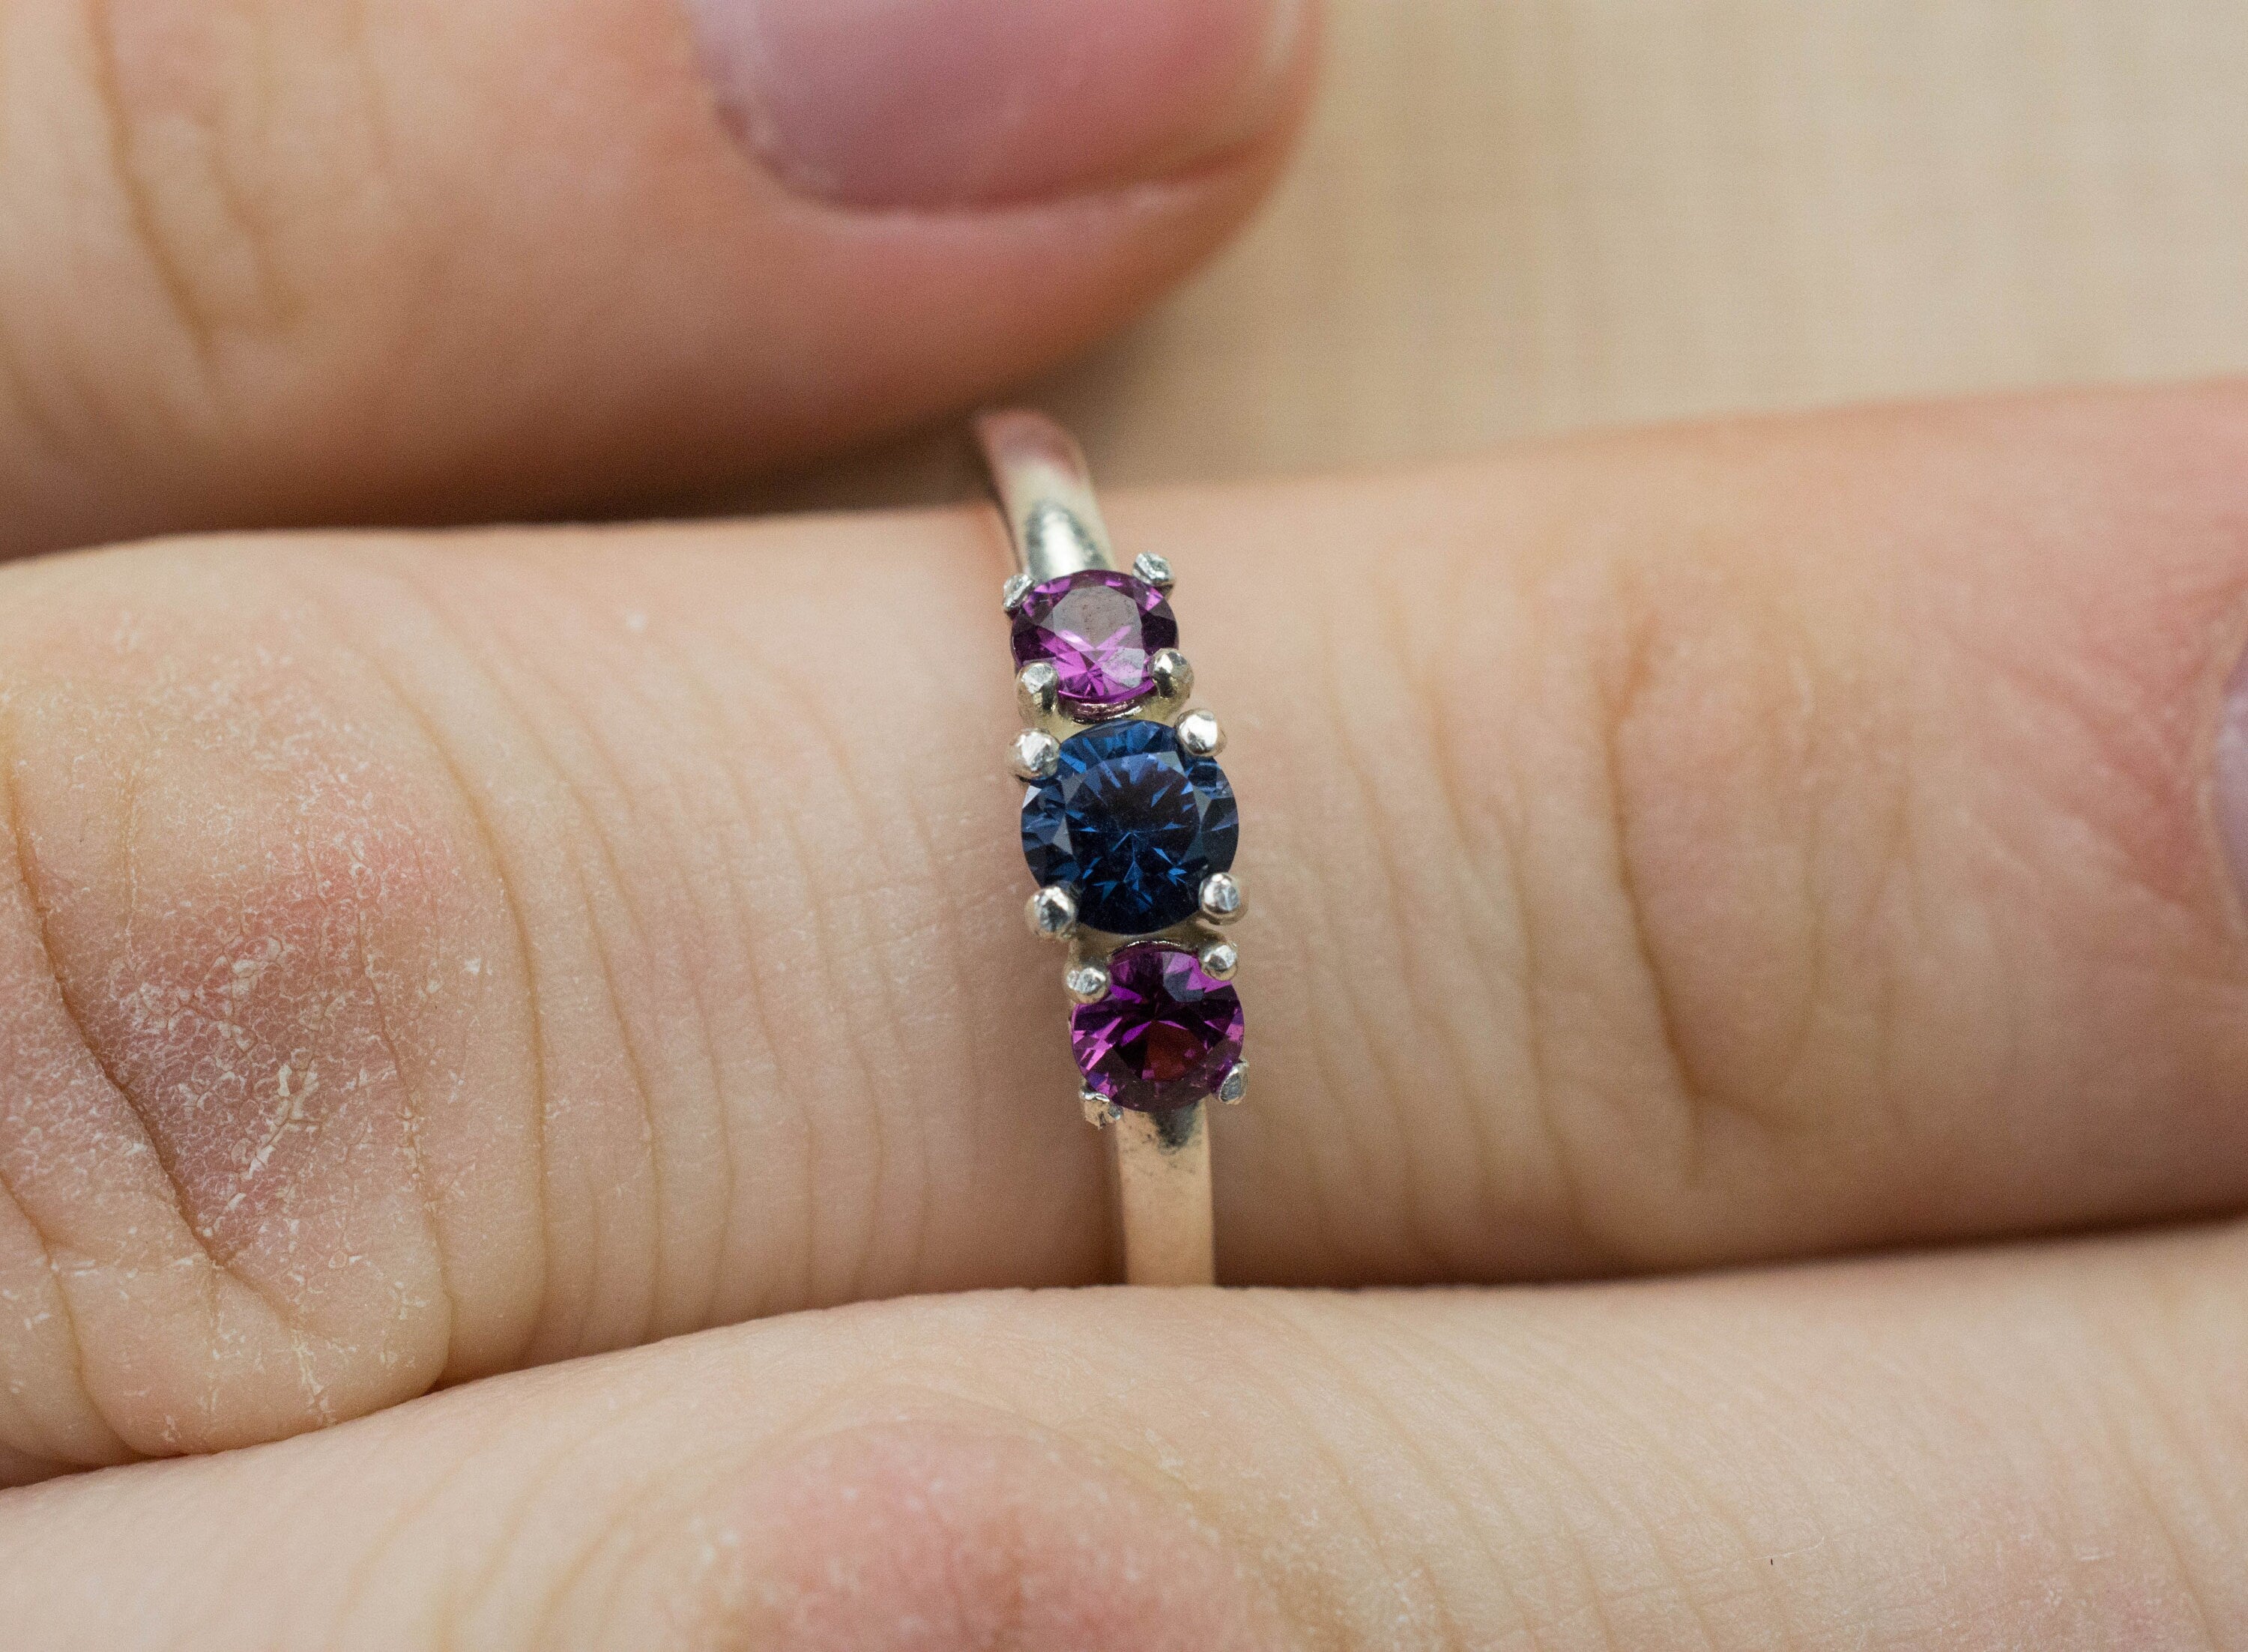 Blue Spinel and Purple Garnet Ring, Genuine Untreated Mozambique Spinel and Garnet